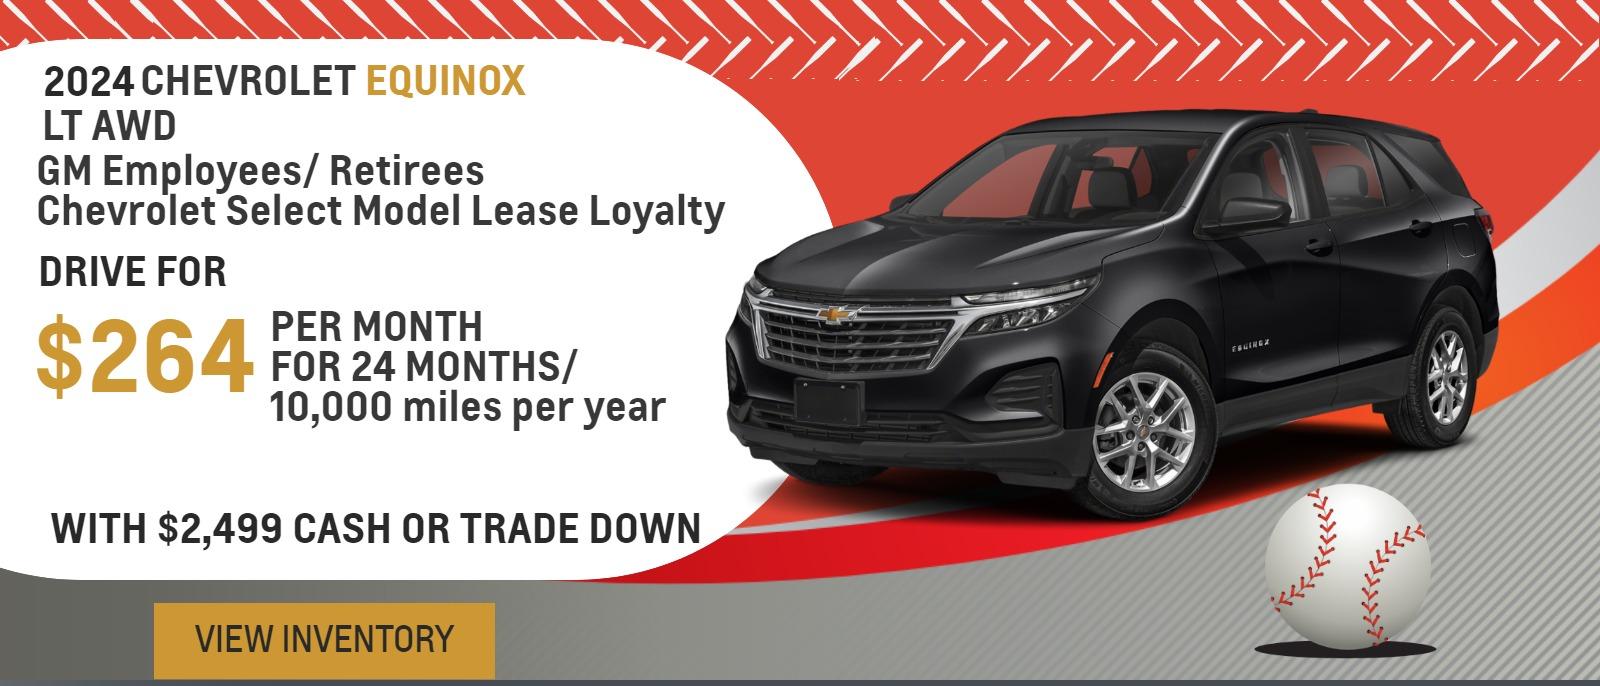 2024 Equinox LT AWD
GM Employees/ Retirees
Chevrolet Select Model Lease Loyalty

Drive for $264 per month
24 Months / 10,000 miles per year
With $2,499 cash or trade down